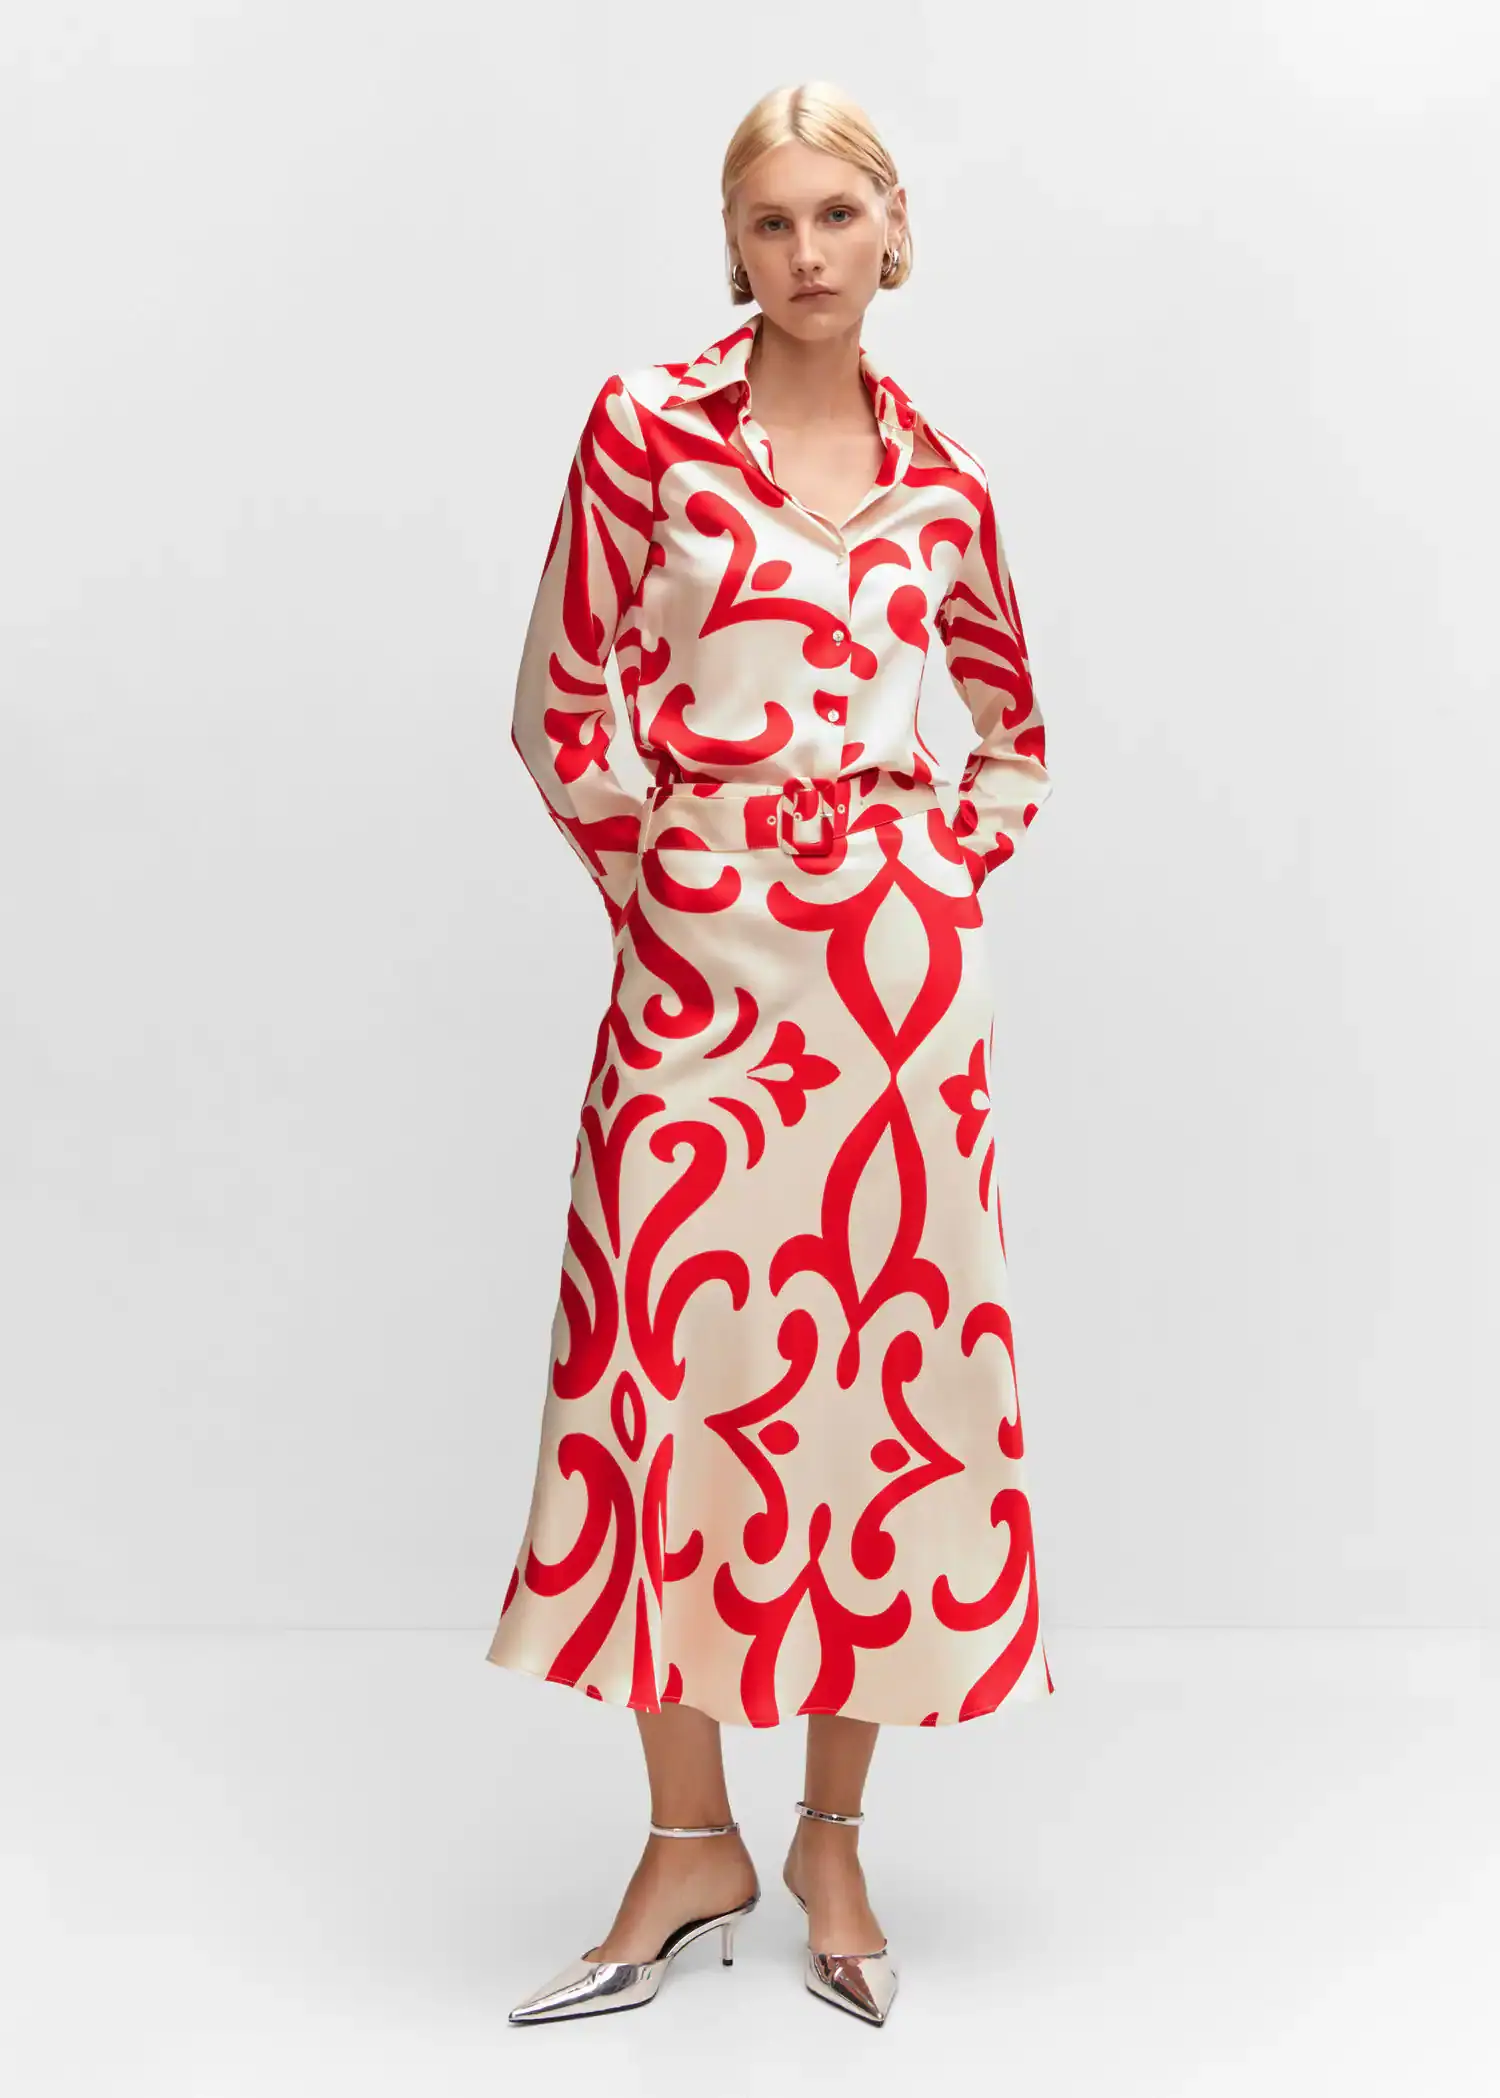 Mango Belt printed skirt. a woman wearing a red and white dress. 